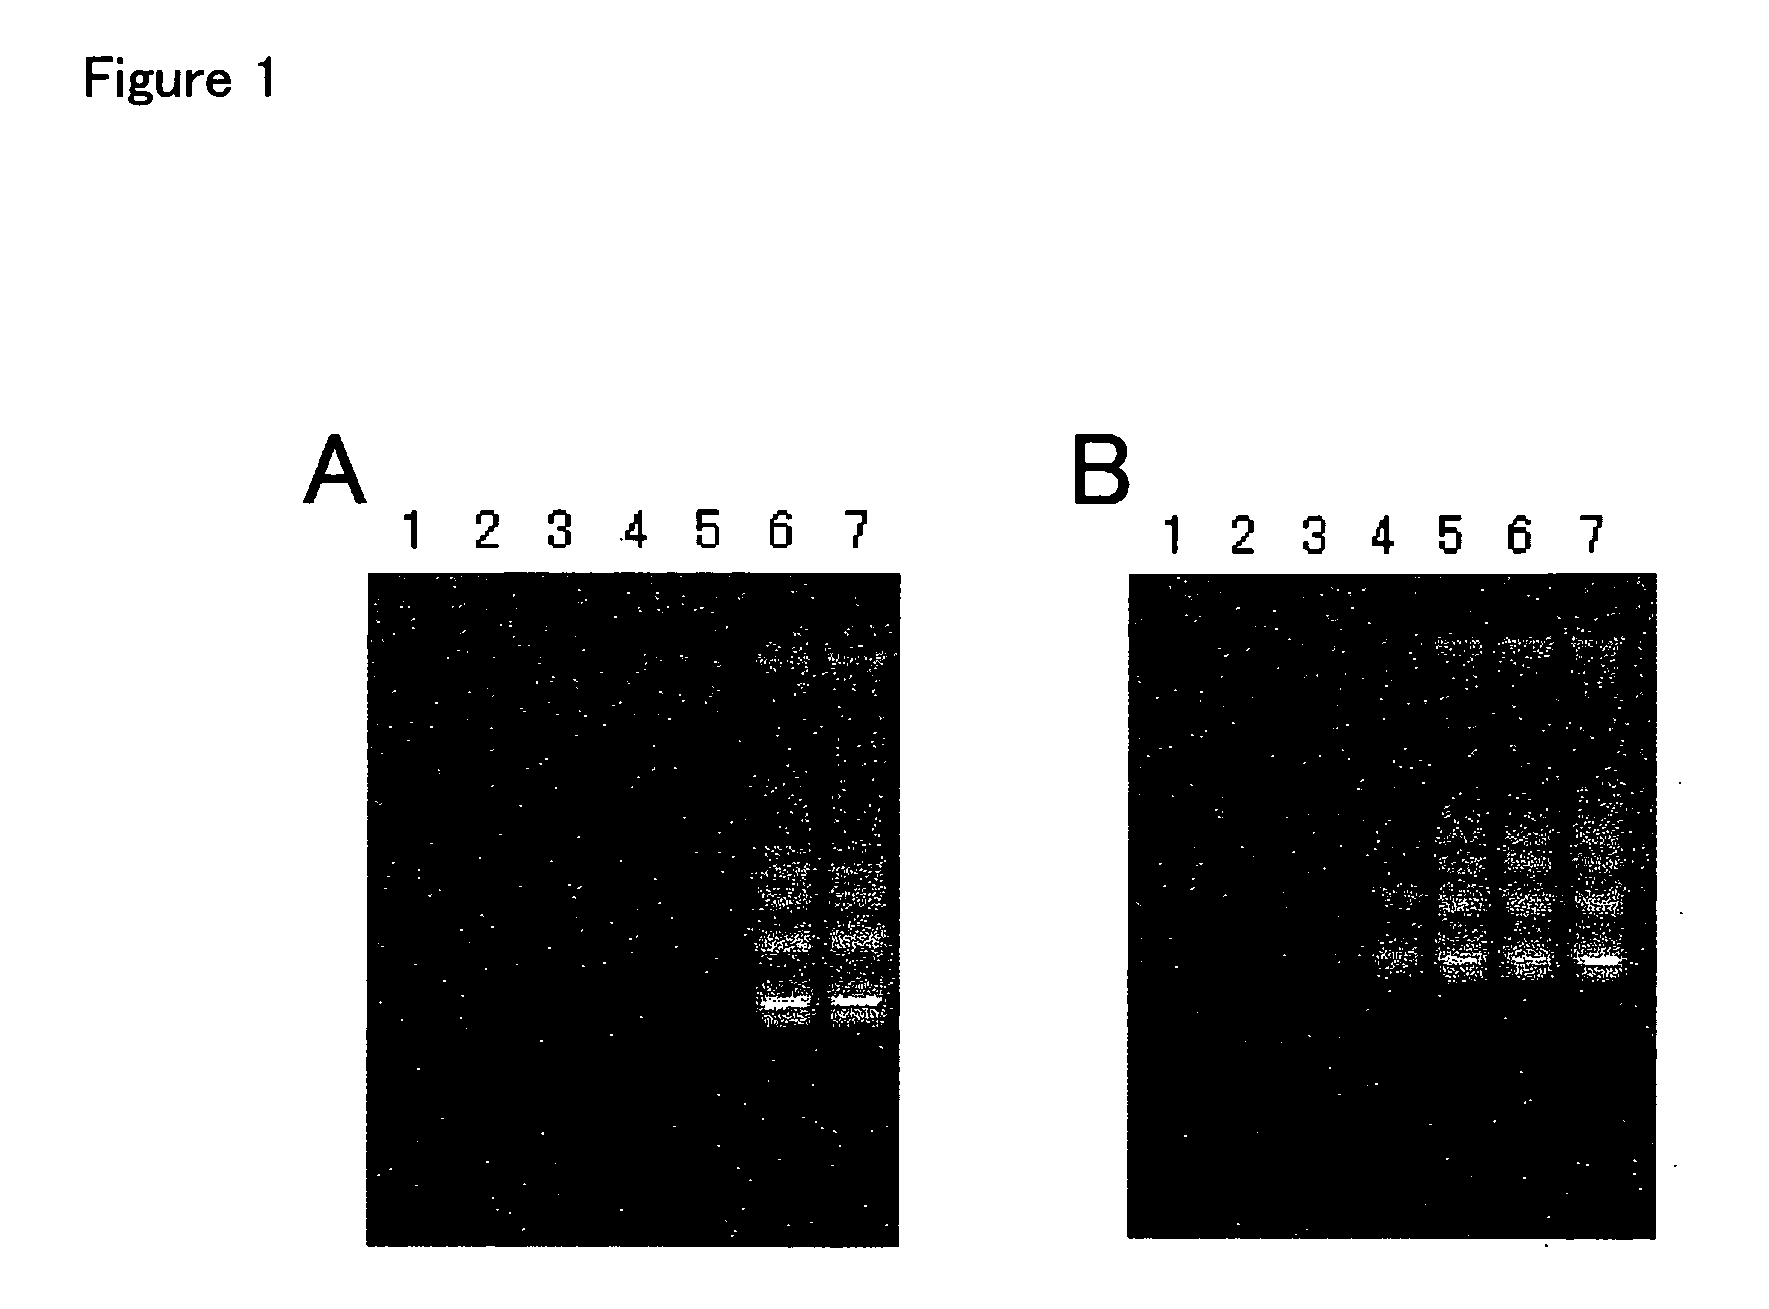 Nucleic and amplification methods